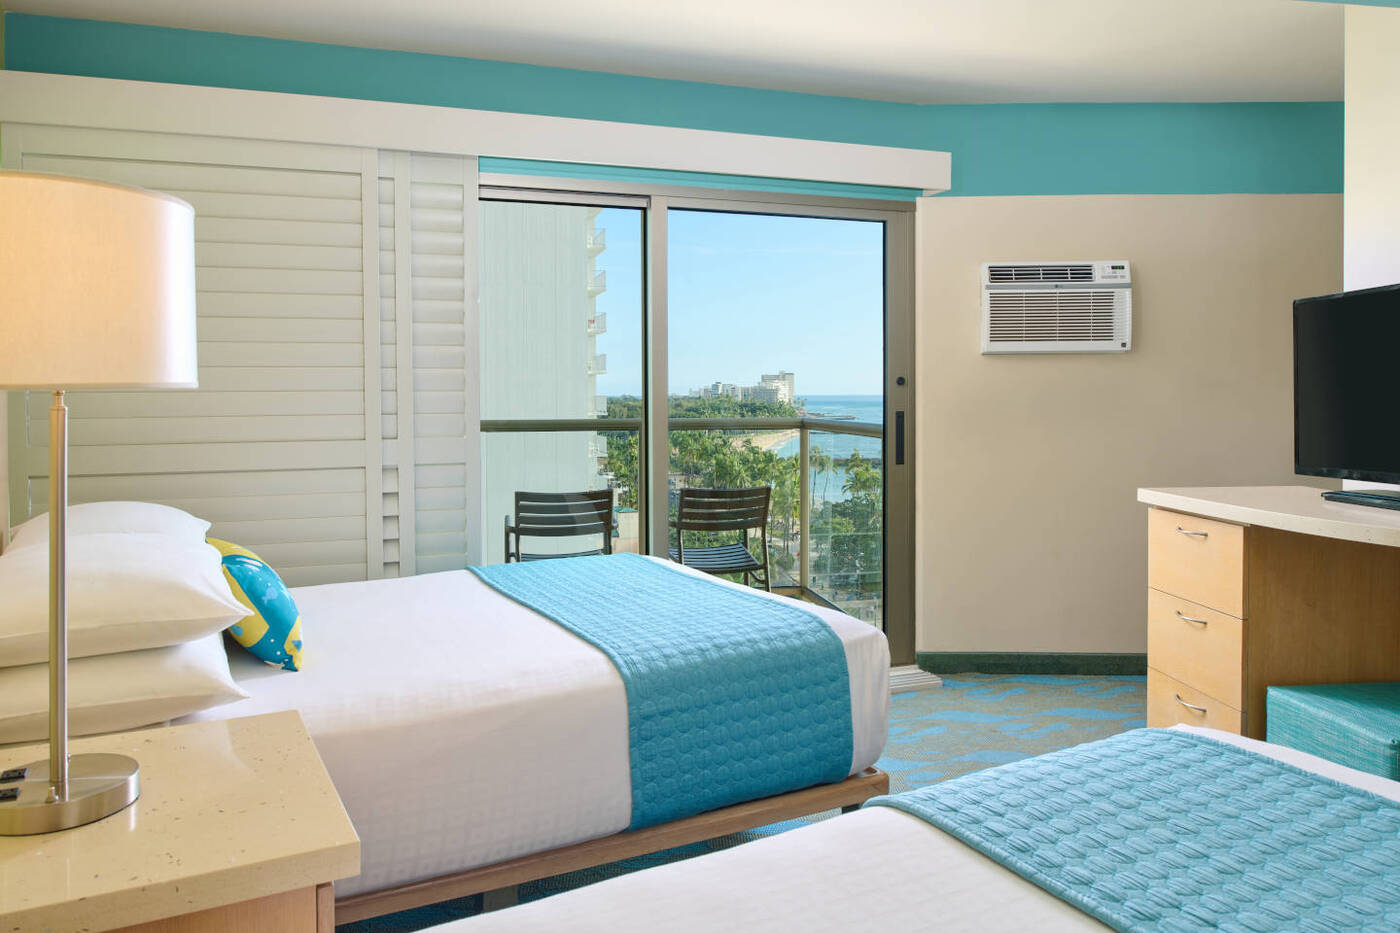 Room with 2 beds, nightstand, lamps, TV, balcony with ocean view